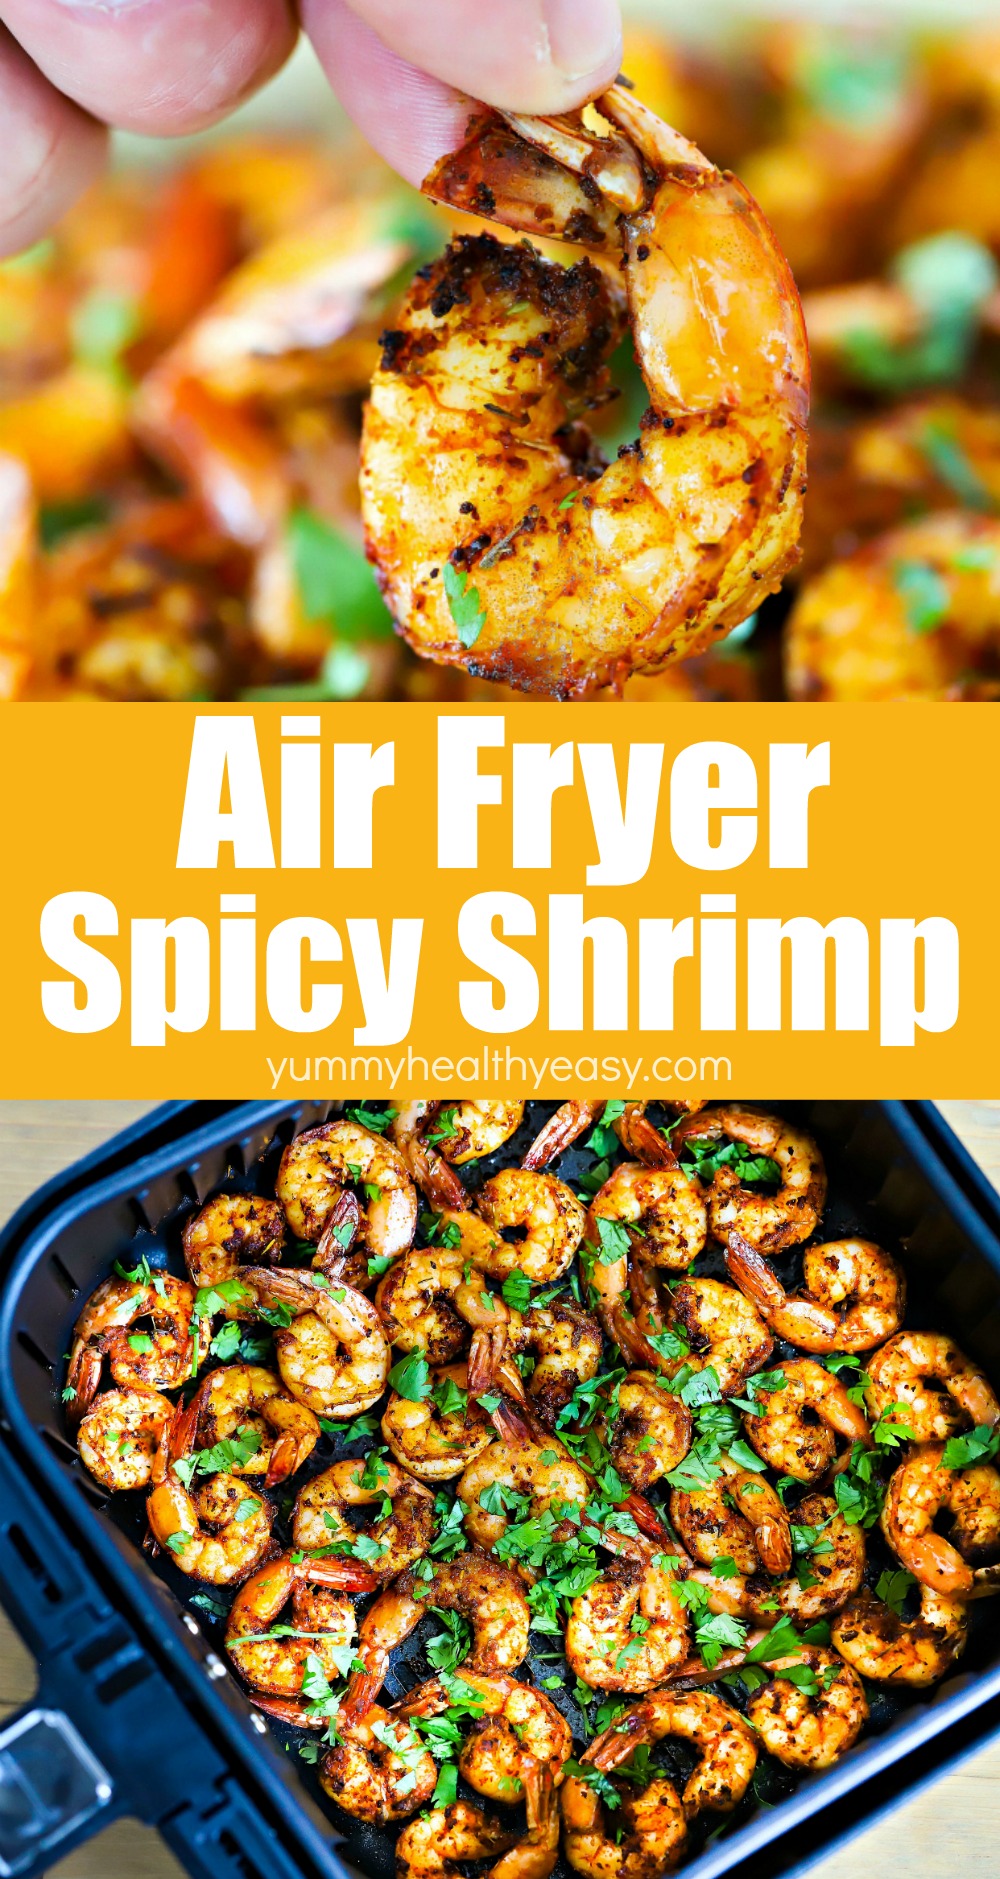 This Air Fryer Spicy Shrimp Recipe is so easy to make and only takes a few minutes in the air fryer! Toss shrimp in an easy spice mix and you have yourself a delicious appetizer, snack or dinner (great in tacos, burritos or over rice!) #shrimp #shrimprecipe #recipe #dinner #dinnerrecipe #healthyfood #airfryer #airfryerdinner via @jennikolaus